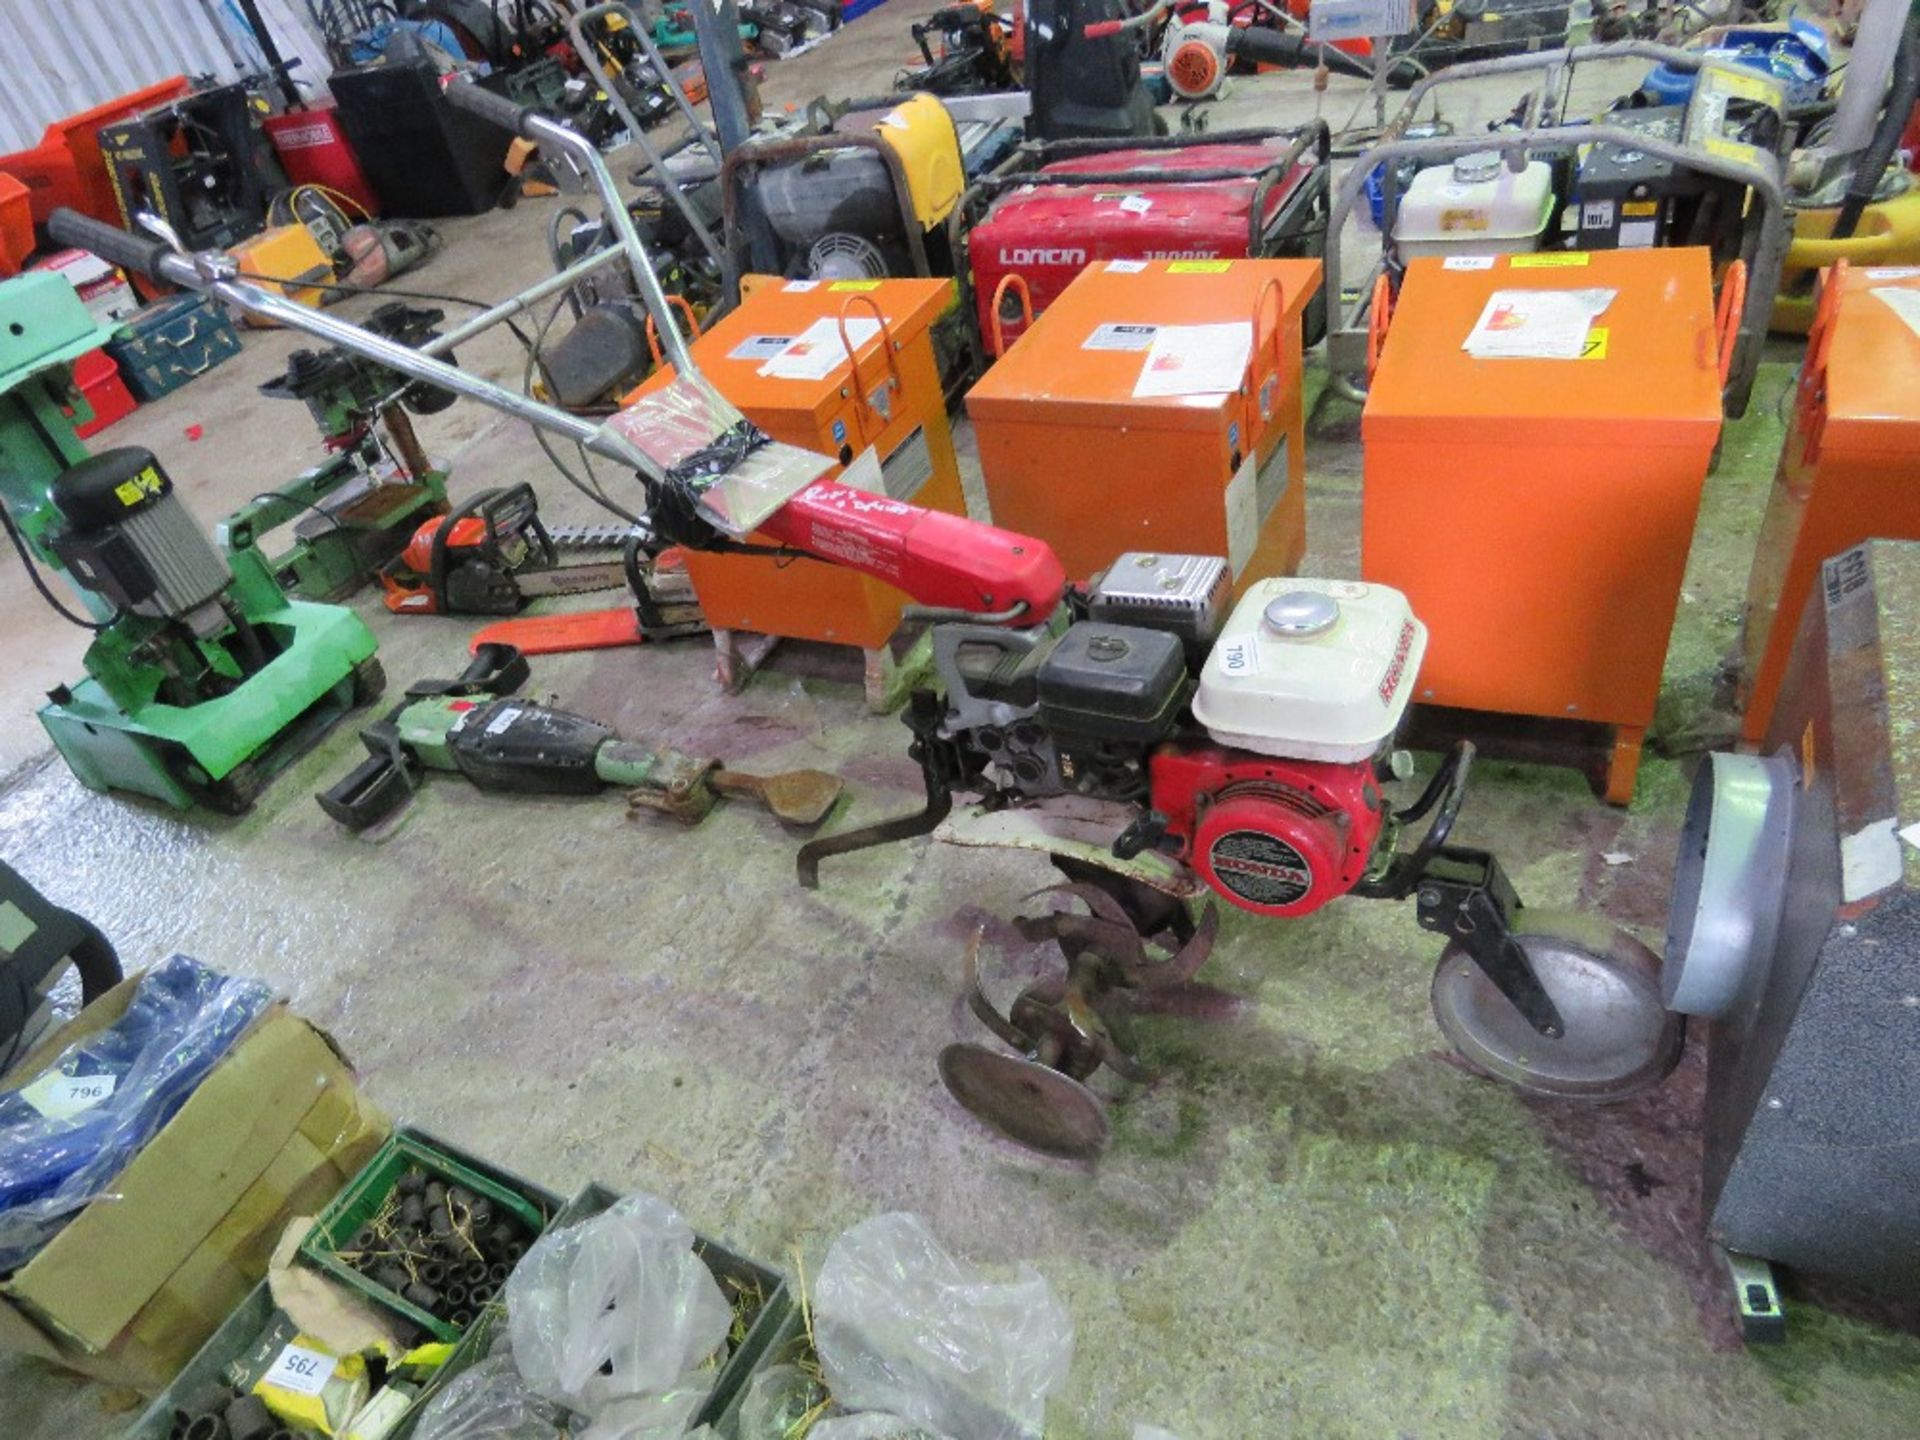 HONDA PETROL ROTORVATOR. WHEN TESTED WAS SEEN TO RUN AND BLADES TURNED. THIS LOT IS SOLD UNDER TH - Image 2 of 3